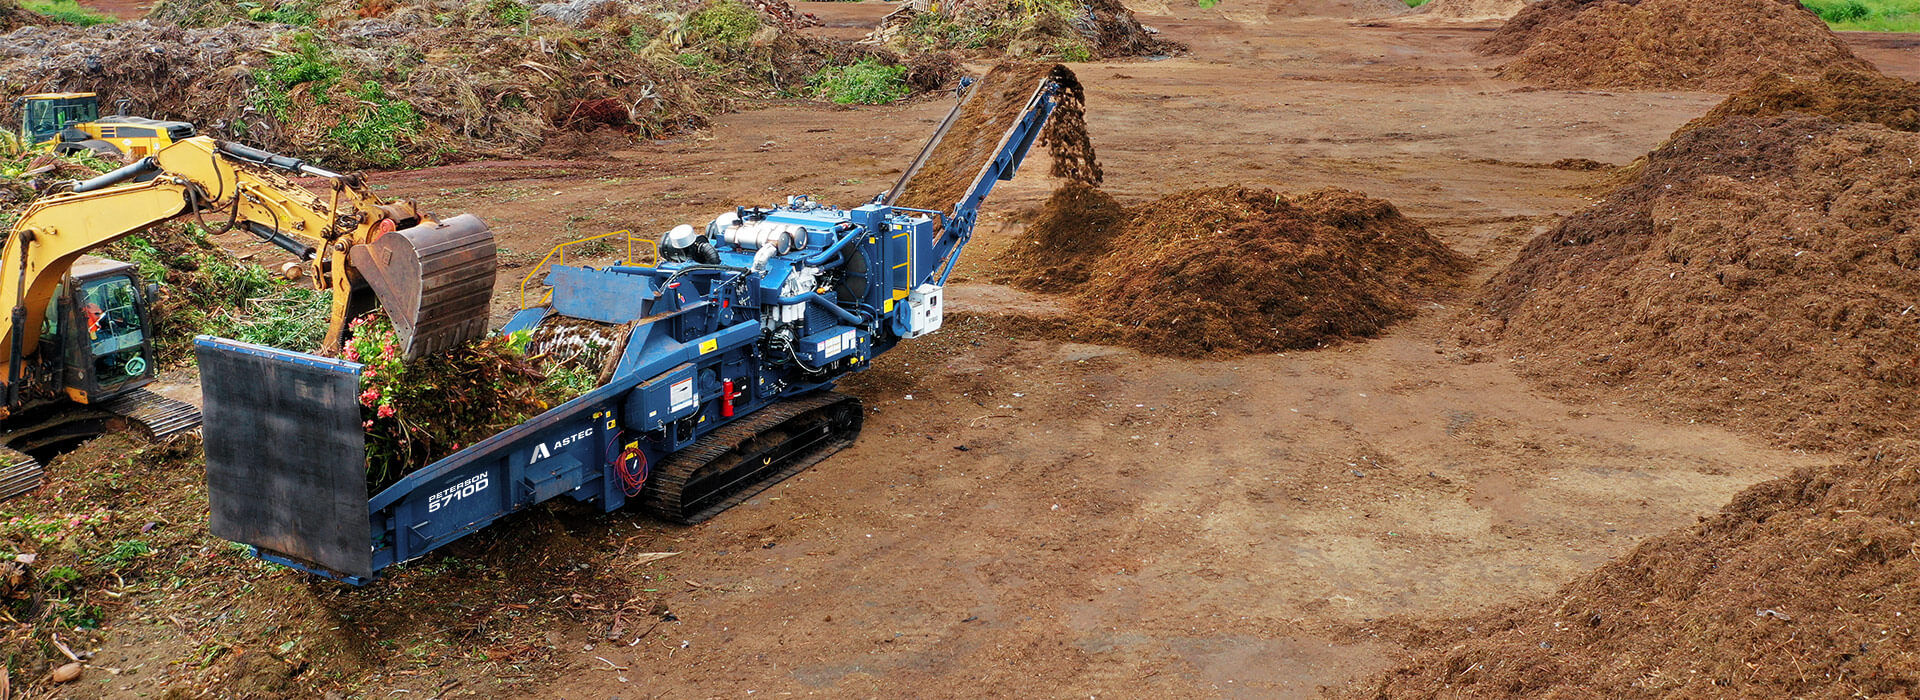 Astec Peterson 5710D Horizontal Grinder making compost from green waste in Hawaii with an loading excavator.